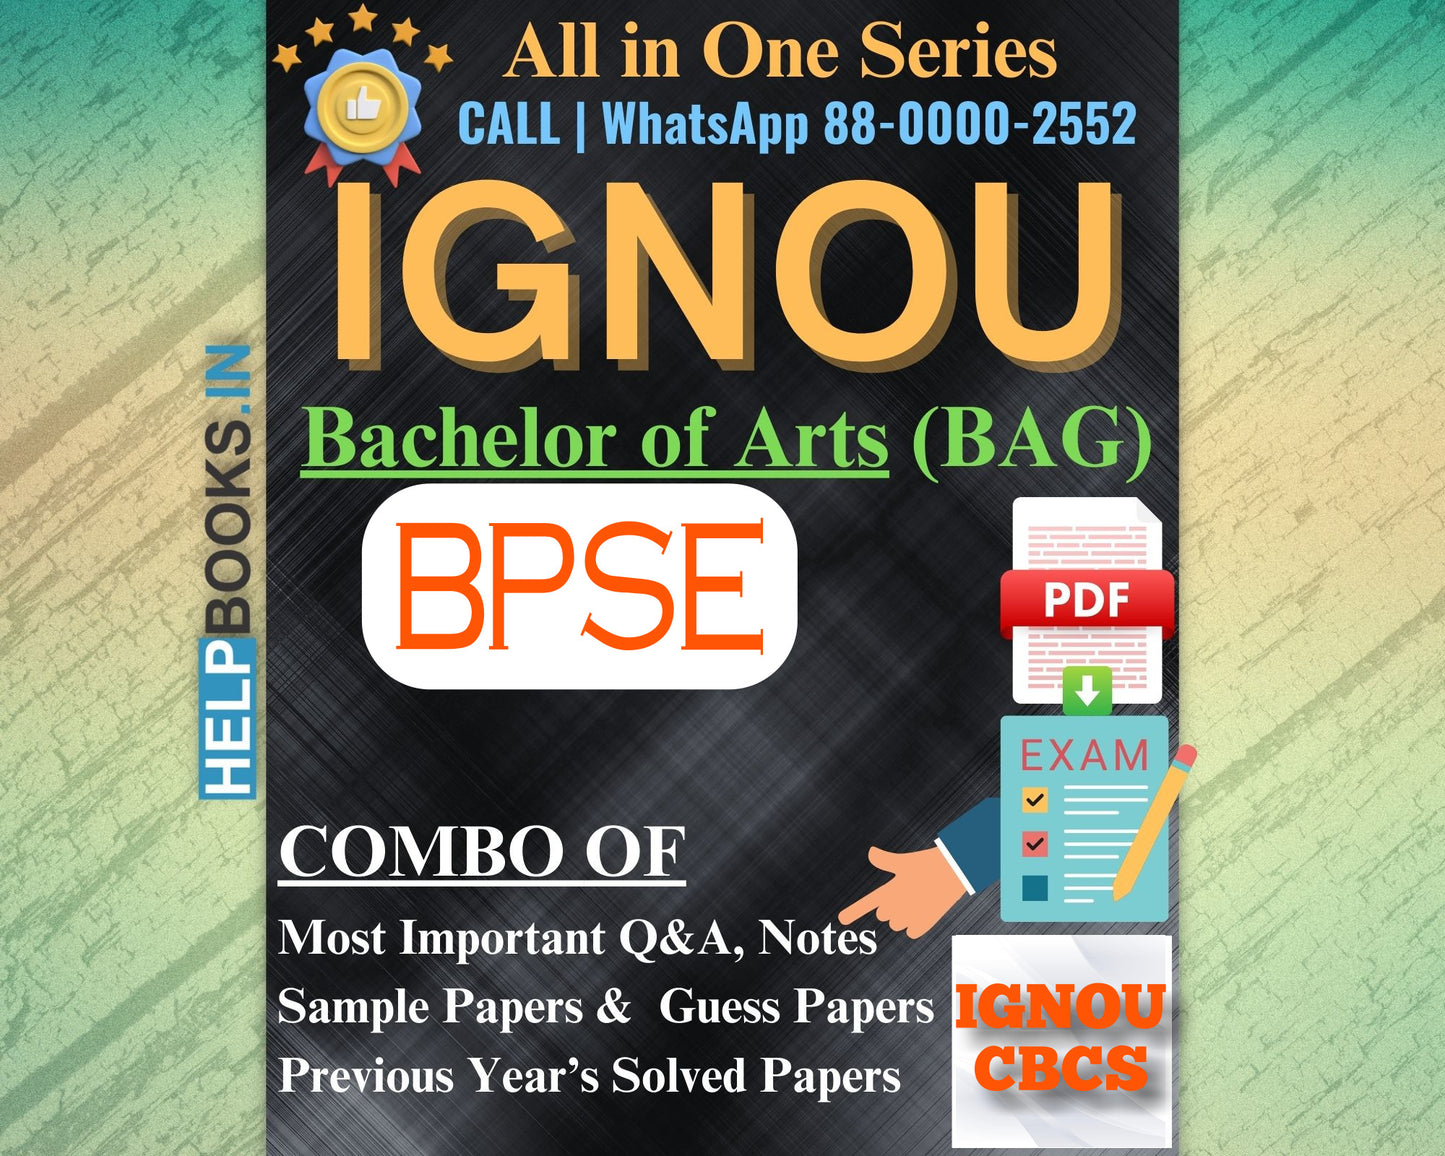 IGNOU BAG Online Study Package: Bachelor of Arts (BA) - Previous Year’s Solved Papers, Q&A, Exam Notes, Sample Papers, Guess Papers-BPSE141, BPSE142, BPSE143, BPSE144, BPSE145, BPSE146